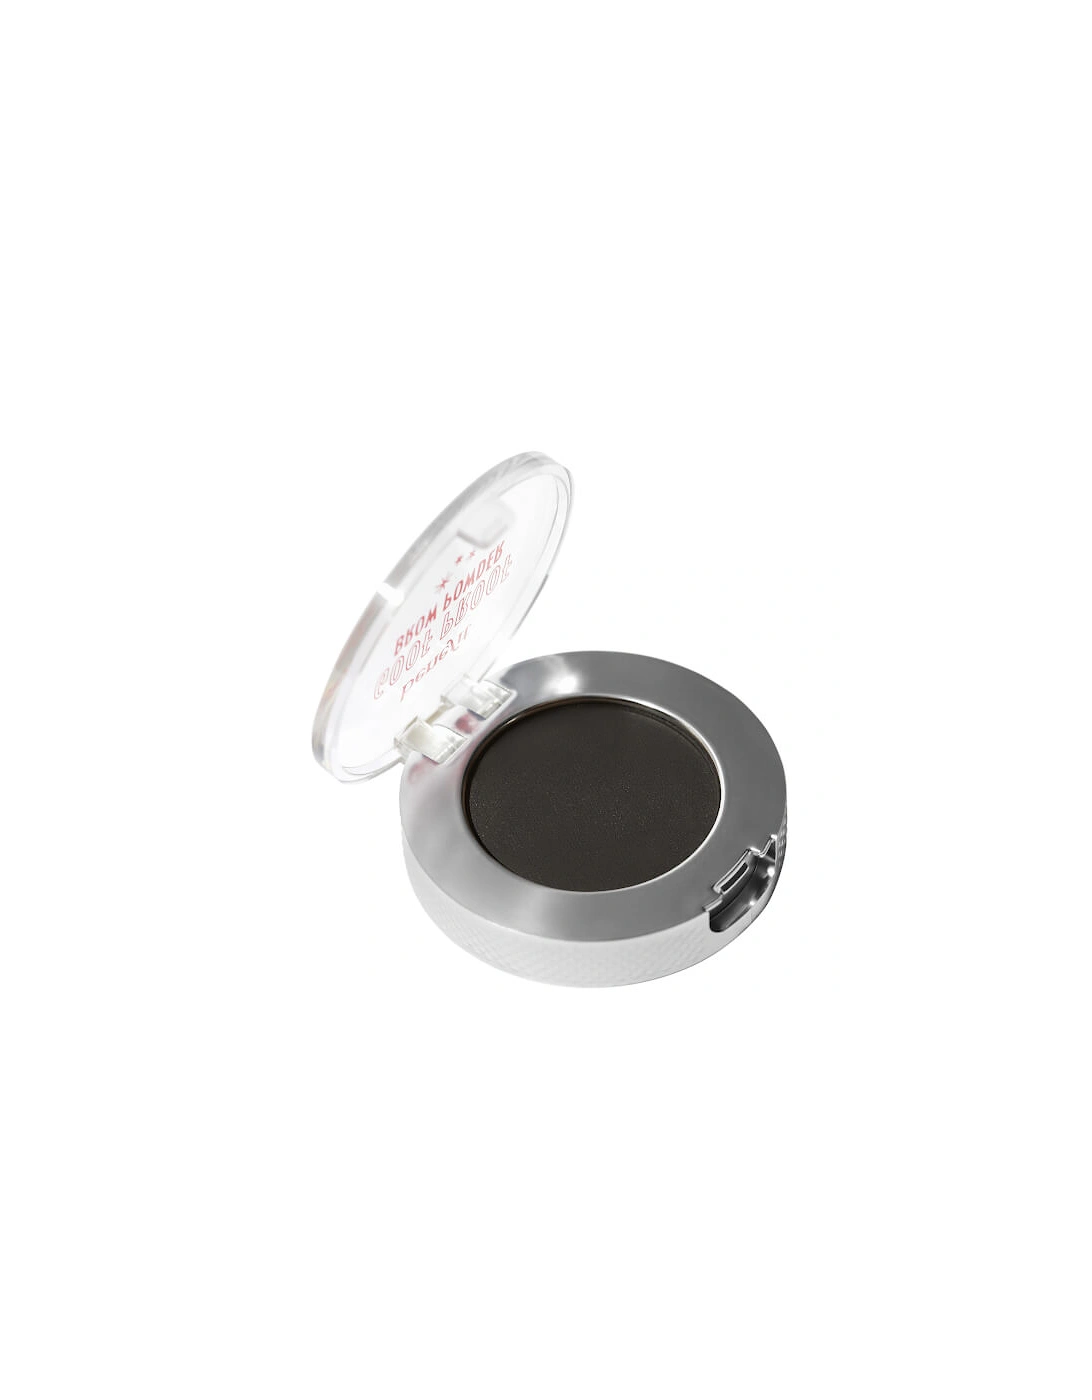 Goof Proof Easy Brow Filling Powder - 06 Cool Soft Black, 2 of 1